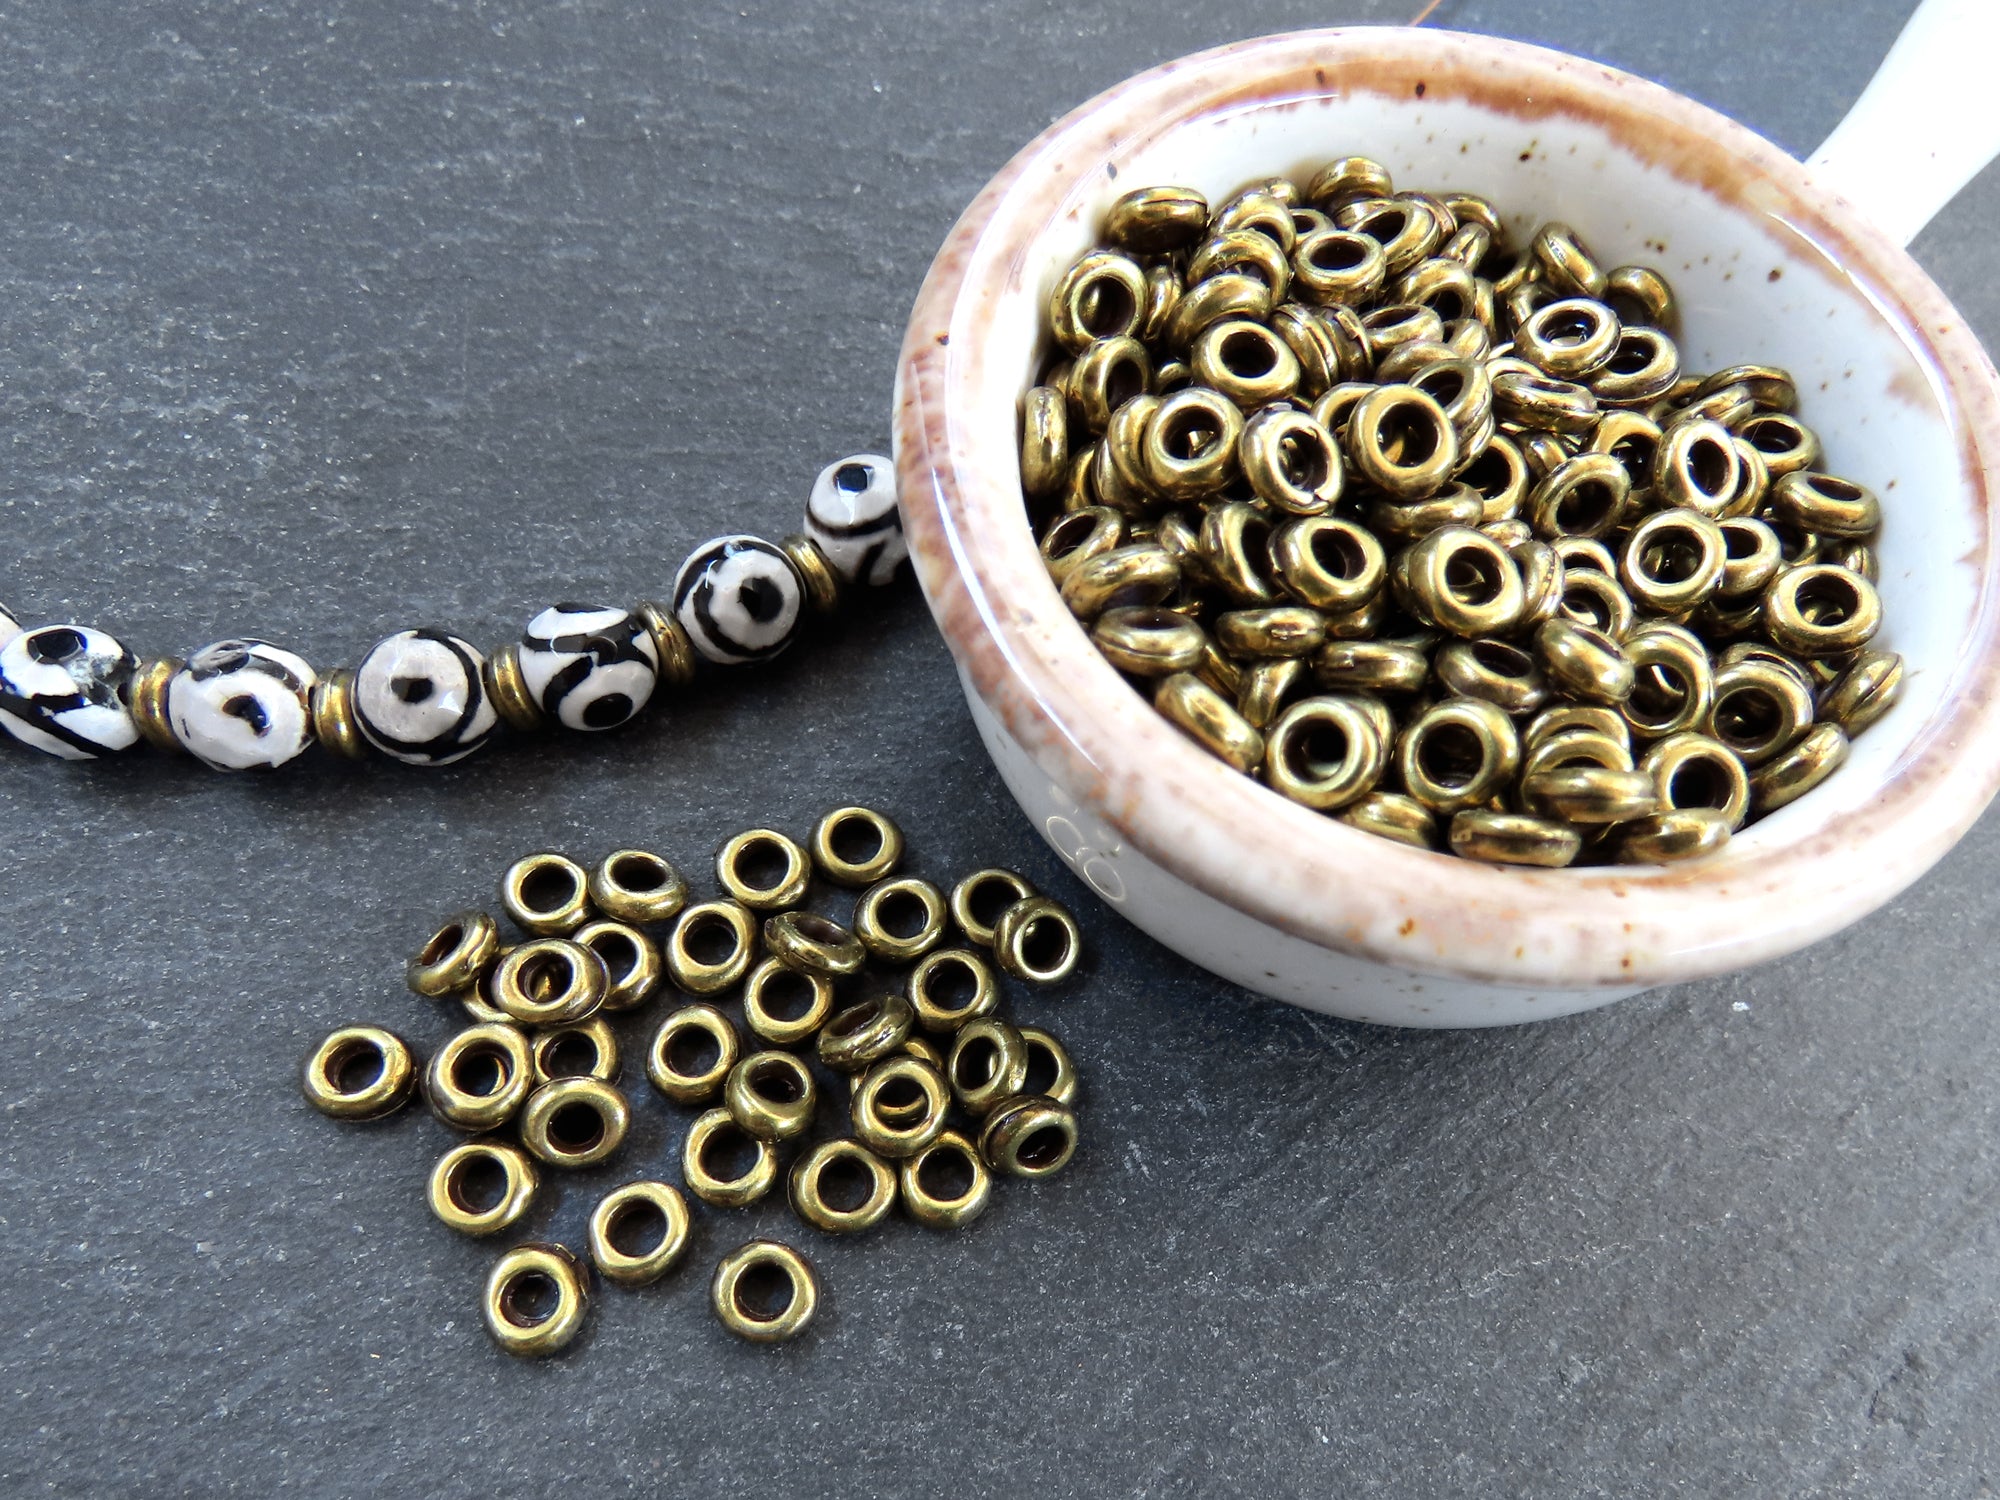  Antique Bronze Spacer Beads for Jewelry Making Small Brass Metal  Beads & Bead Assortments for Bracelet Necklace Earring Making Brass Bead  Spacers for Jewelry Making Brass Shapes for Crafts 500pcs